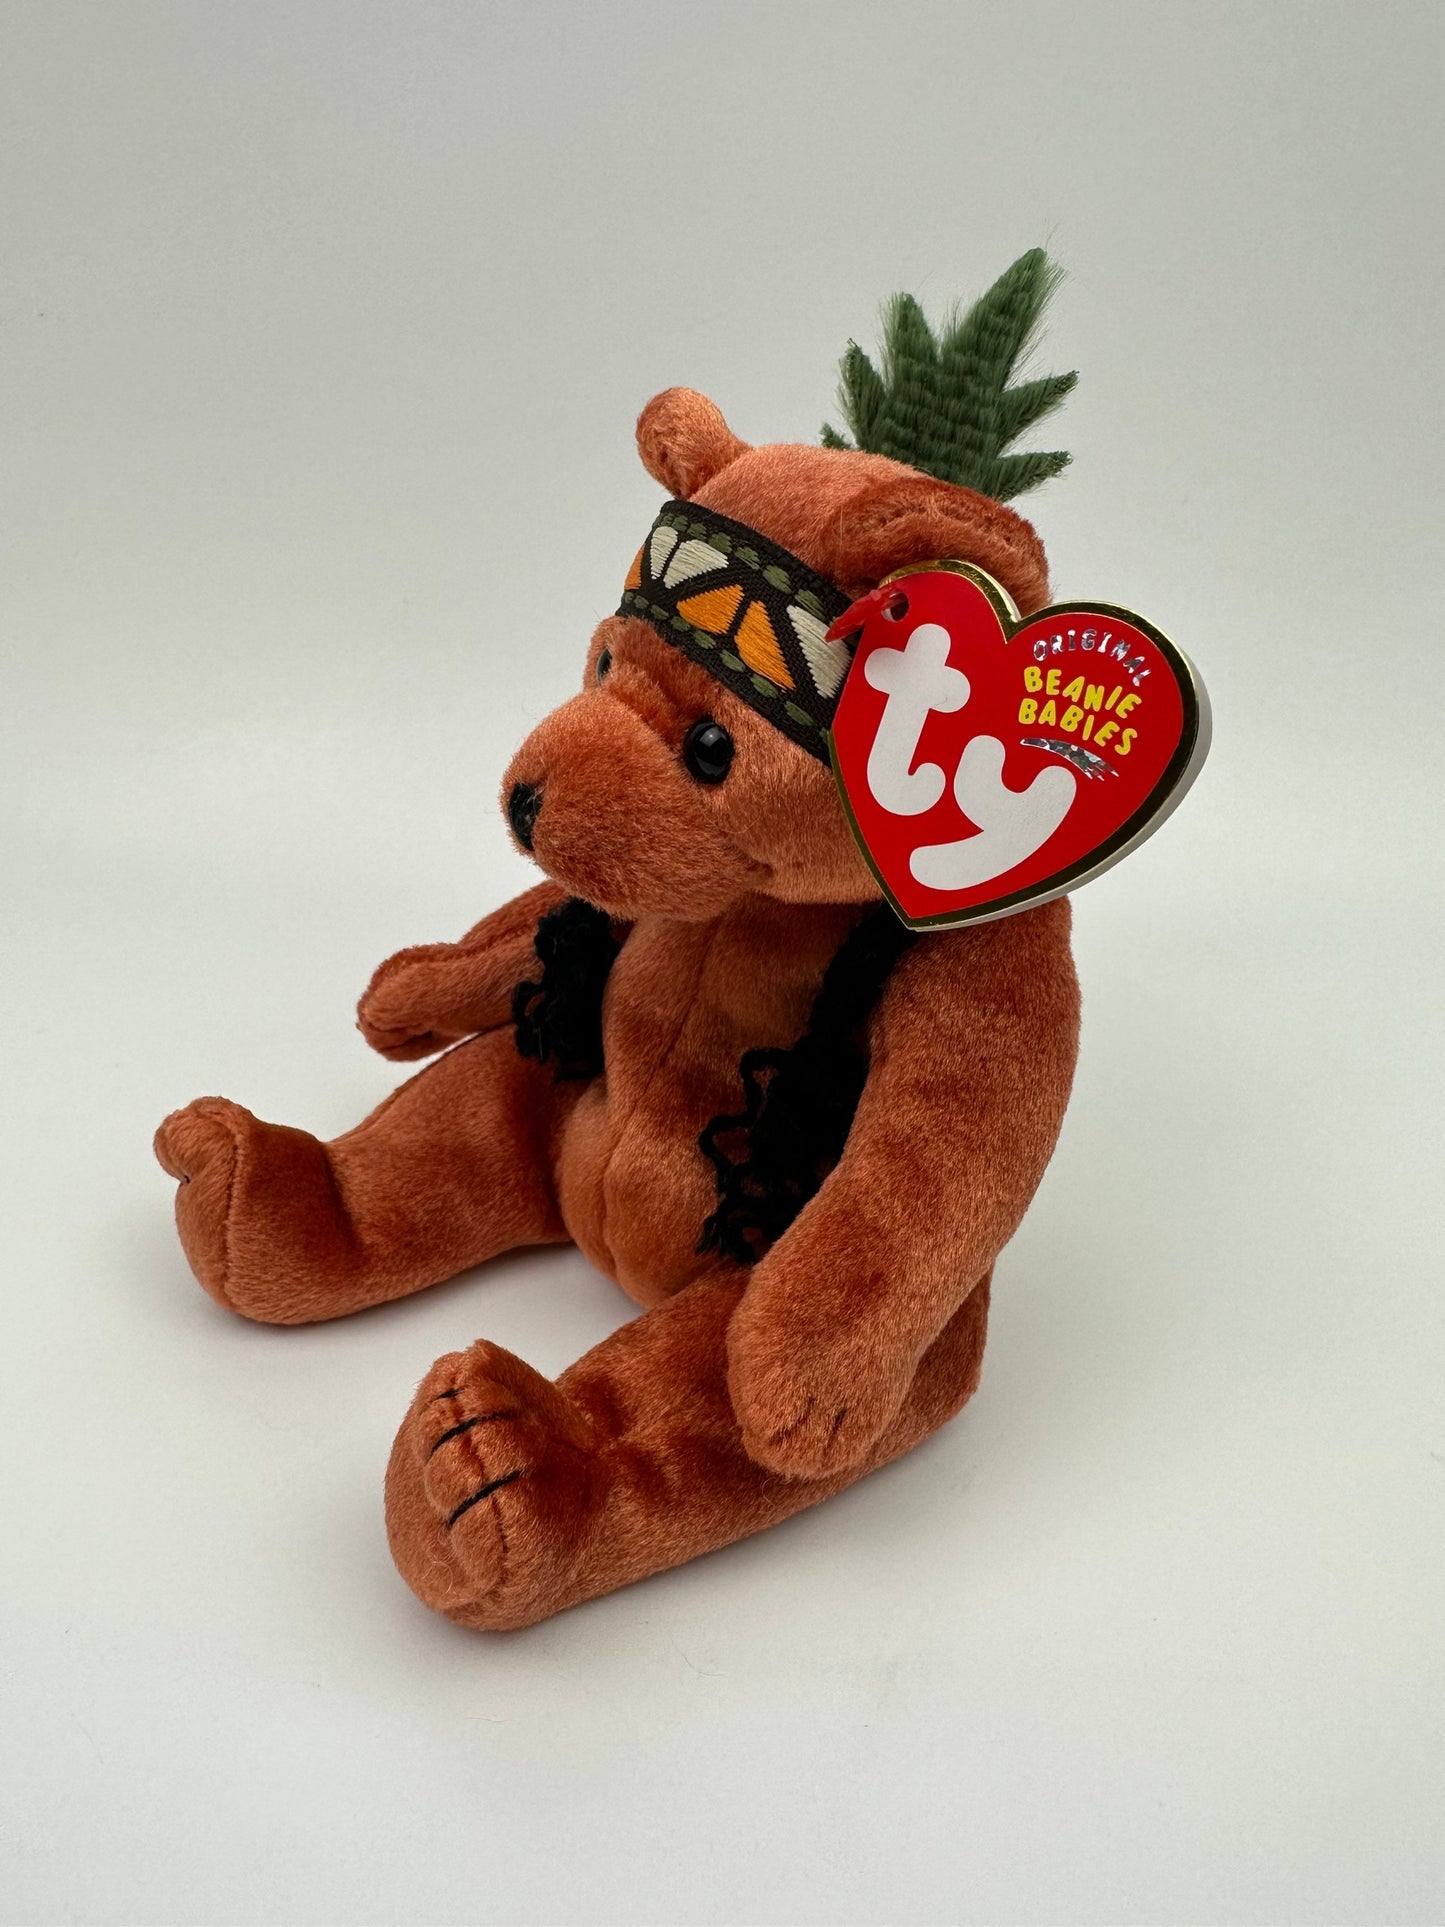 Ty Beanie Baby “Little Feather” the First Nations, Métis, Inuit Bear! (7 inch)